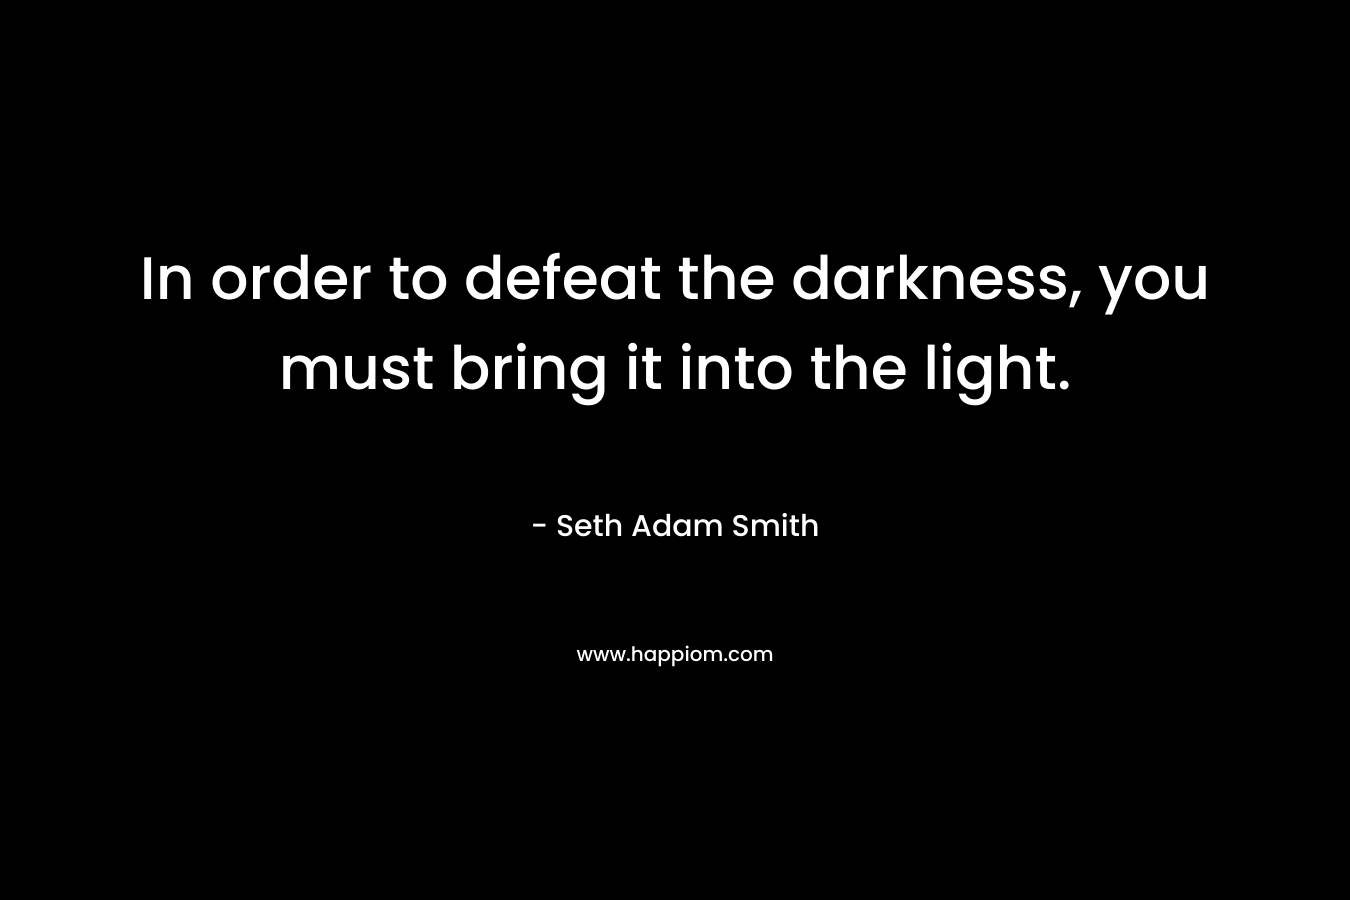 In order to defeat the darkness, you must bring it into the light.